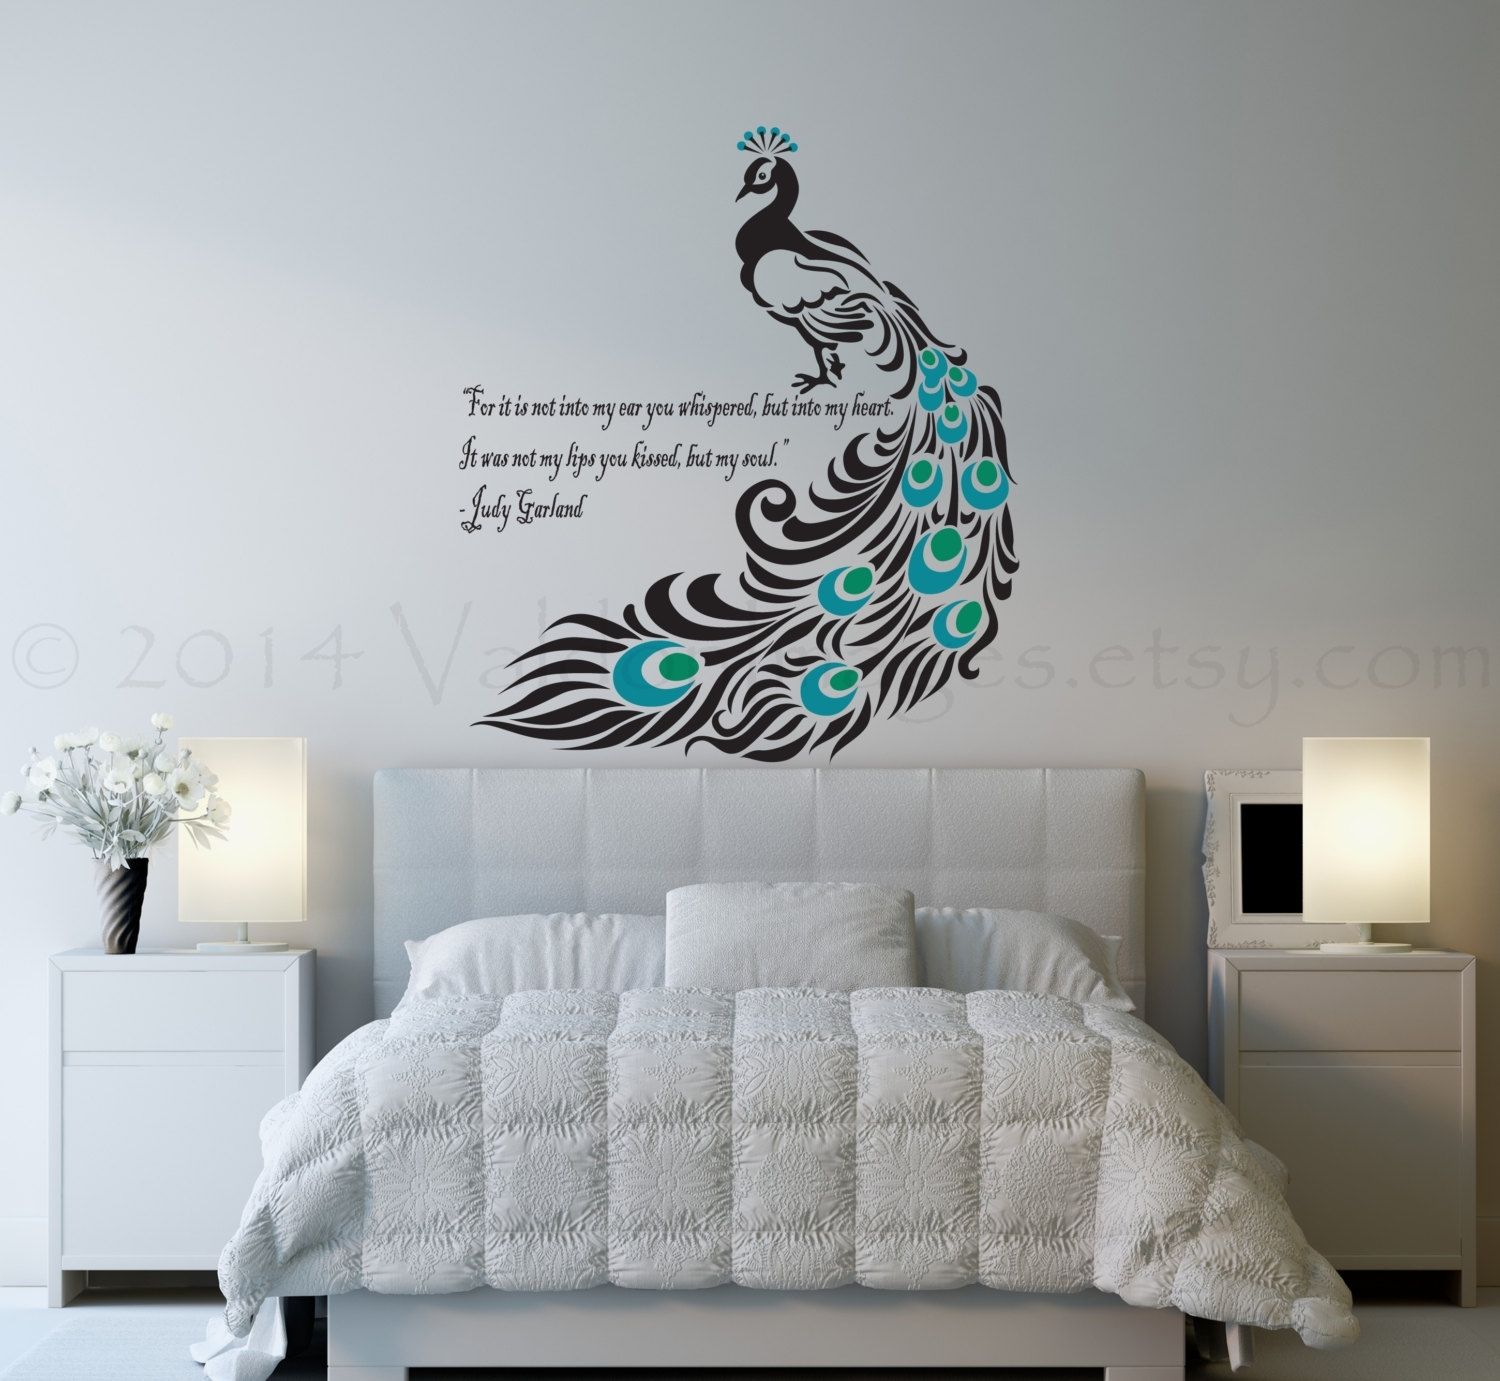 Fancy Wall Art Design Ideas Bedroom Ideal Artistic Walls Nice Pertaining To Wall Art For Bedroom (View 2 of 20)